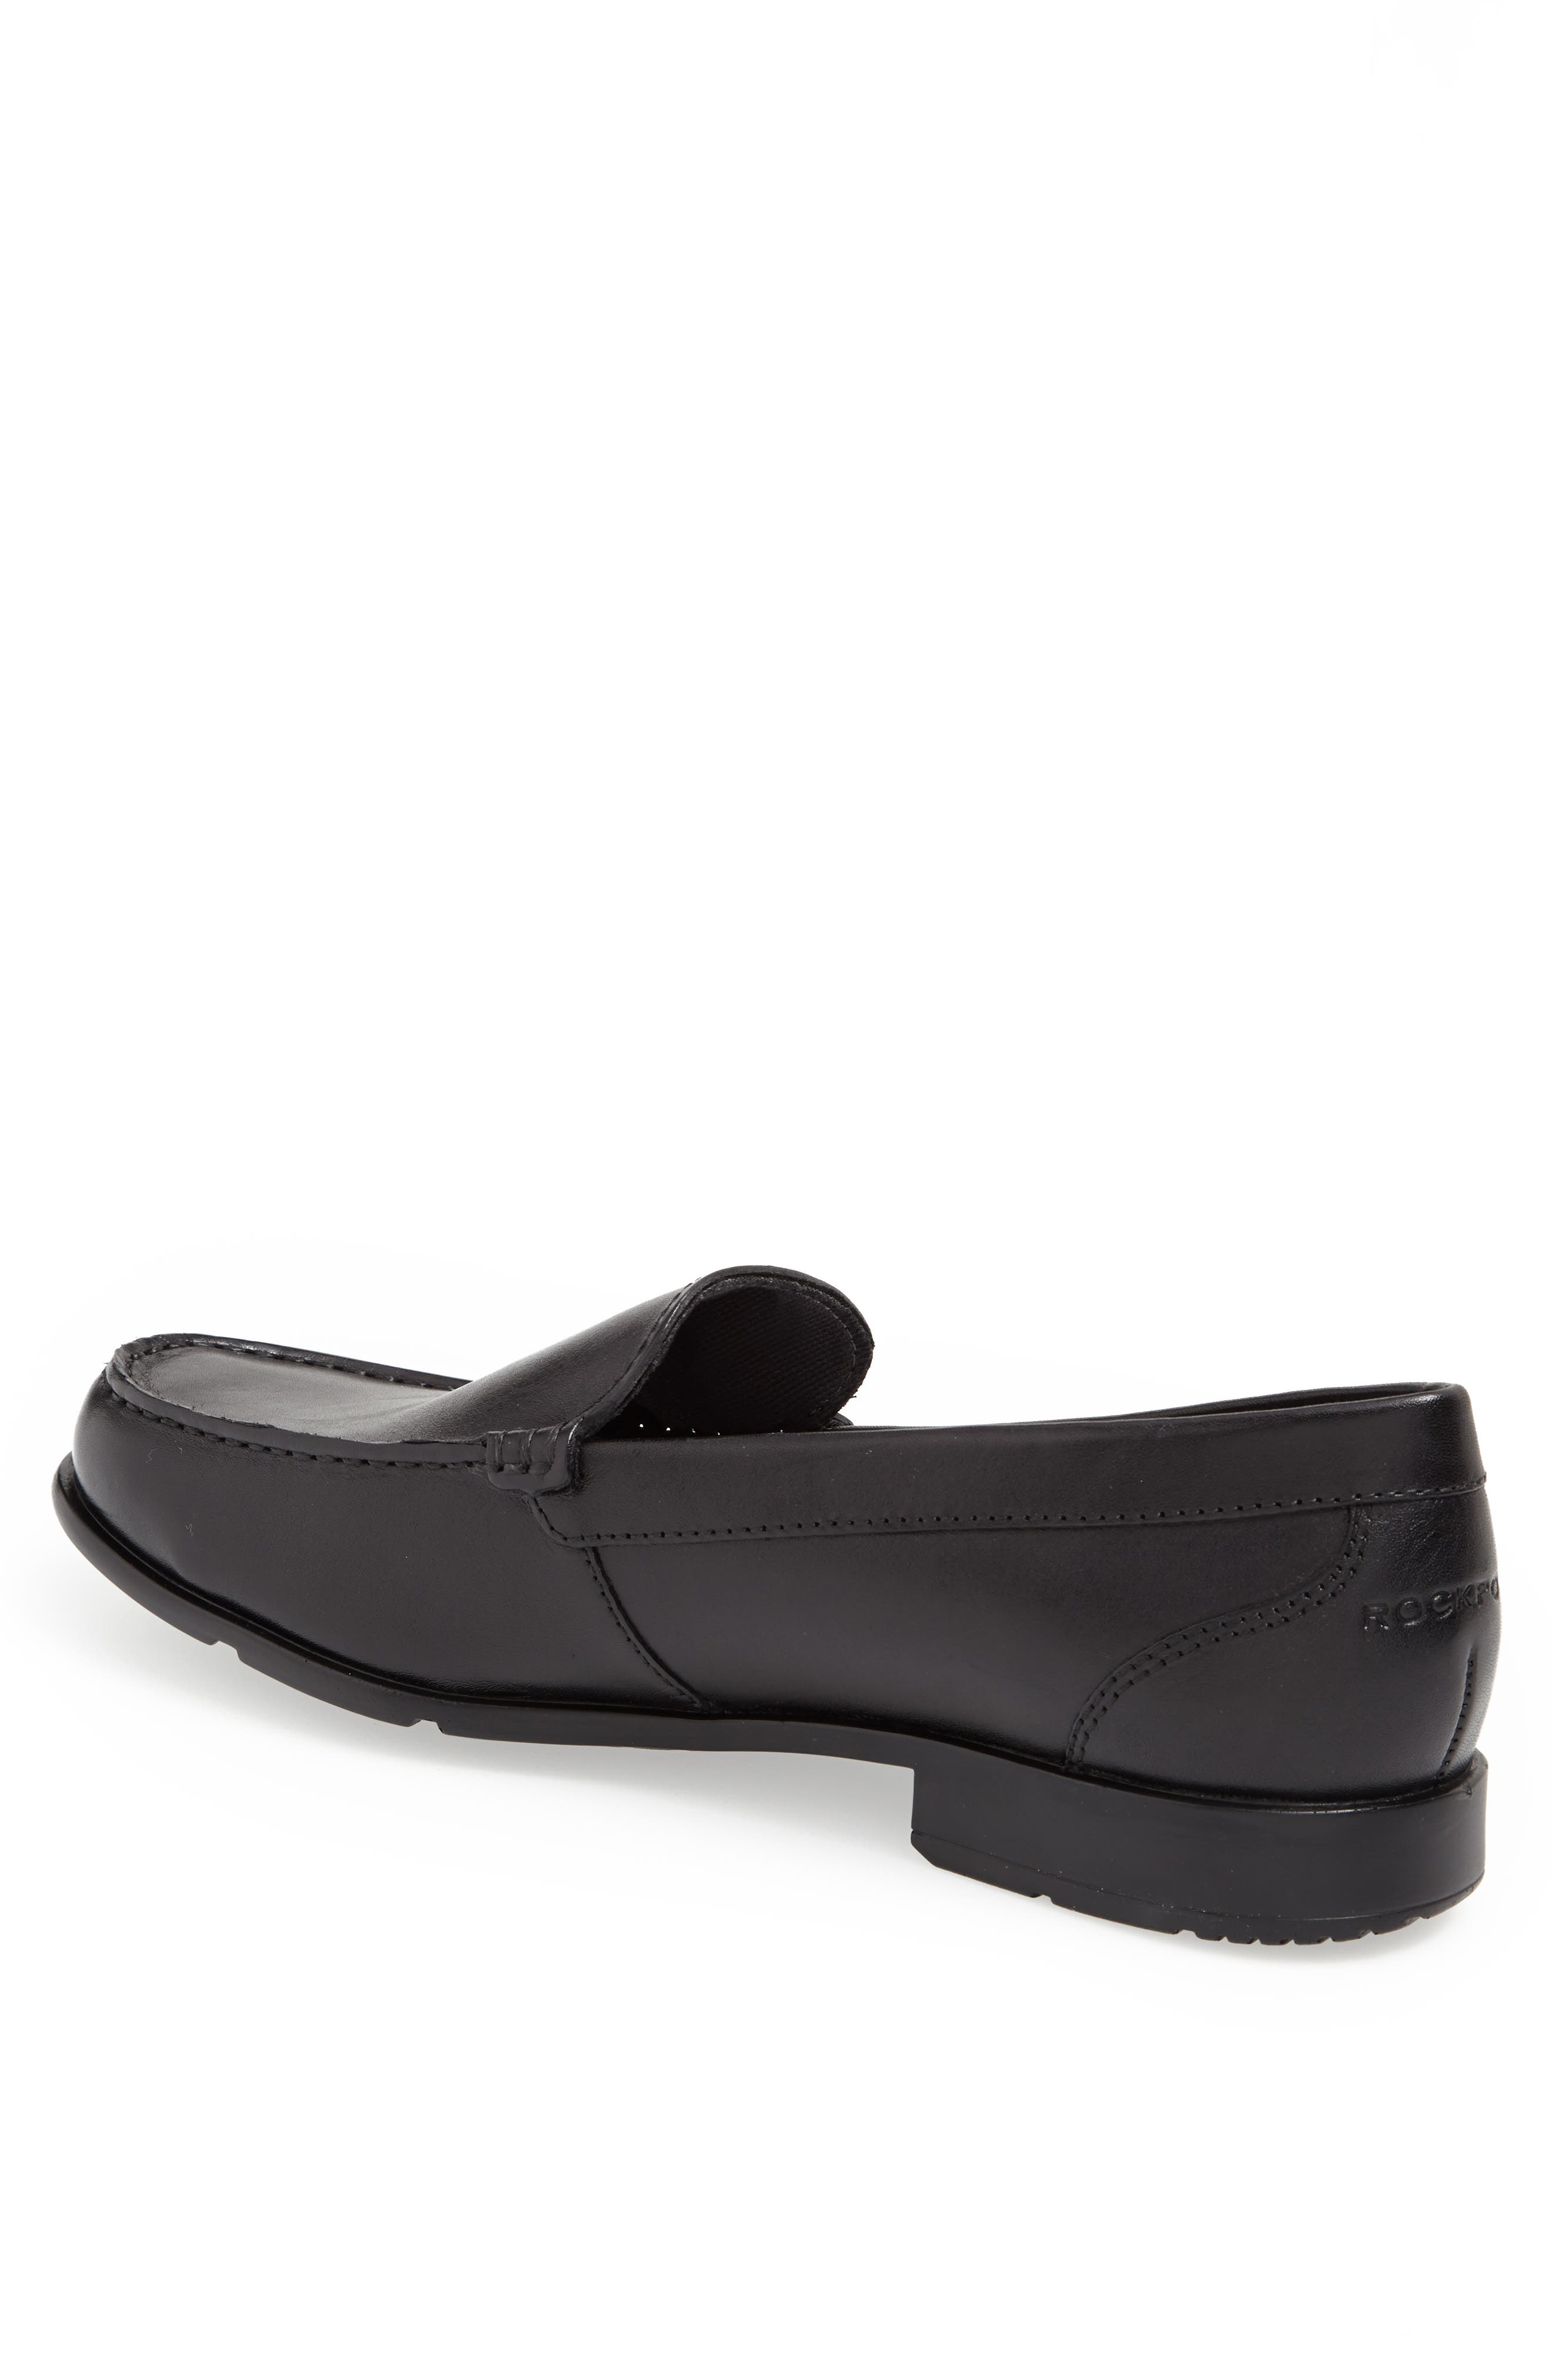 rockport classic loafer venetian